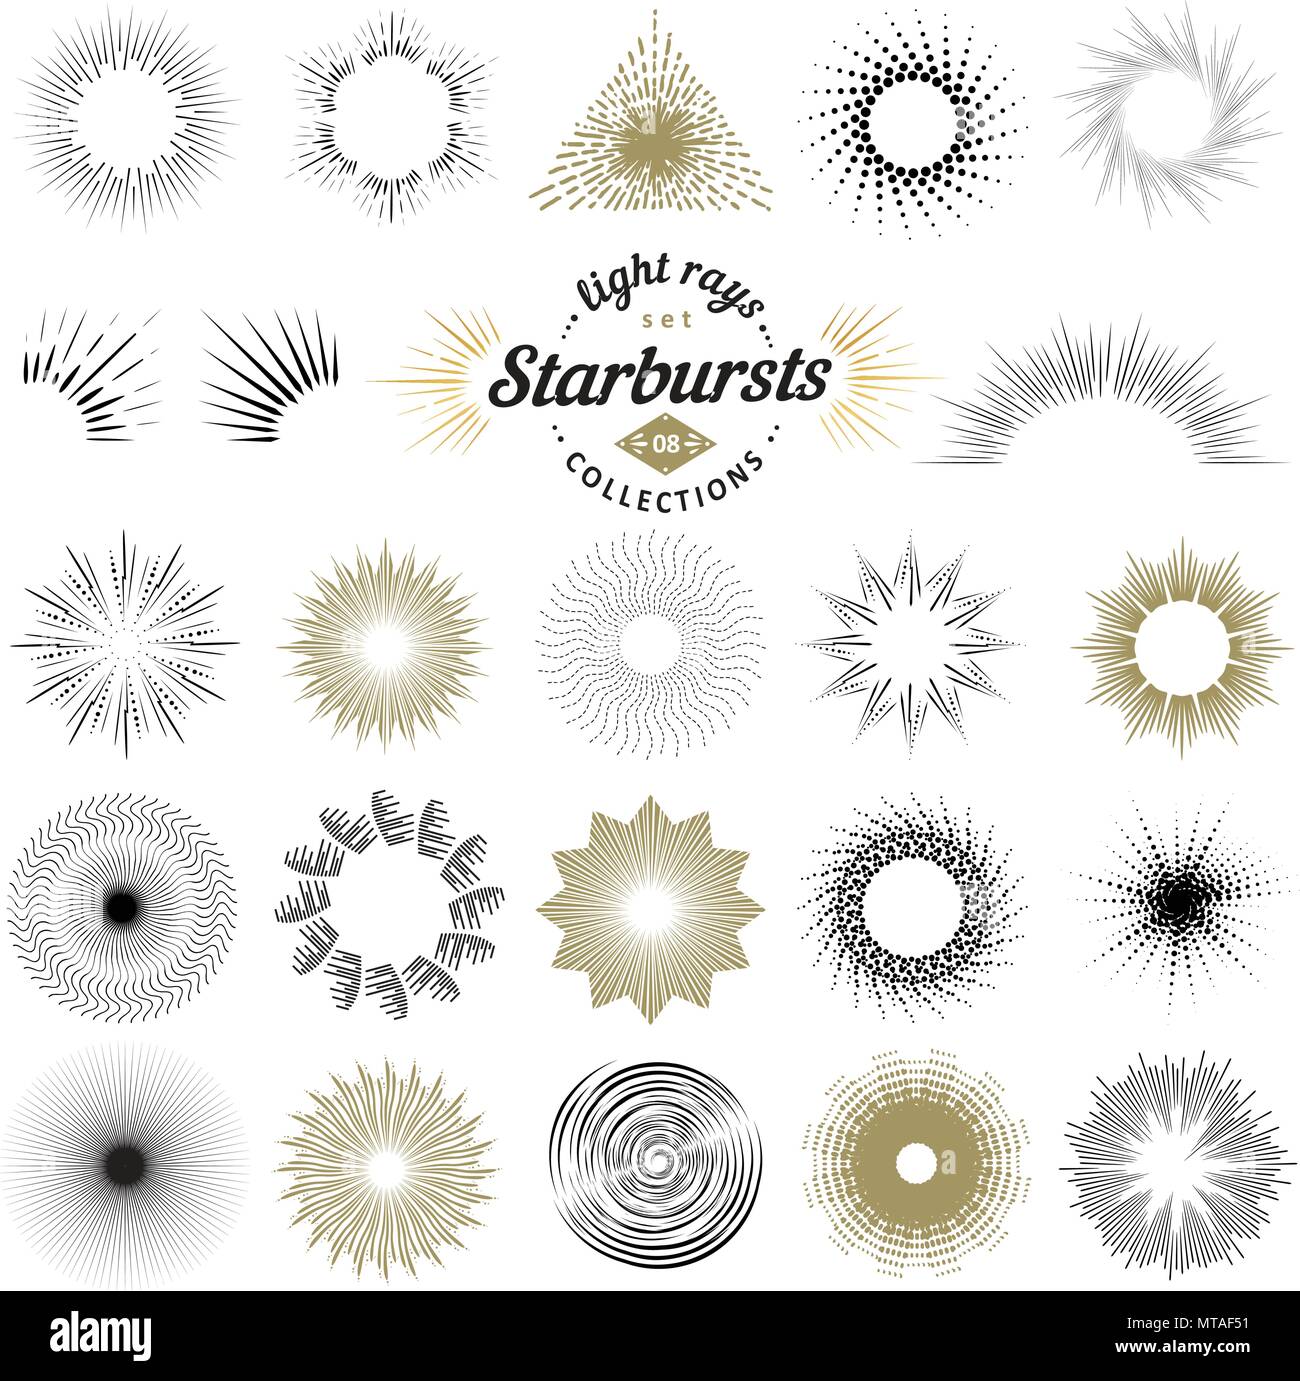 Rays and starburst design elements. Collection of sunburst vintage style elements and icons for label and stickers. Hand drawn sunshine shapes Stock Vector